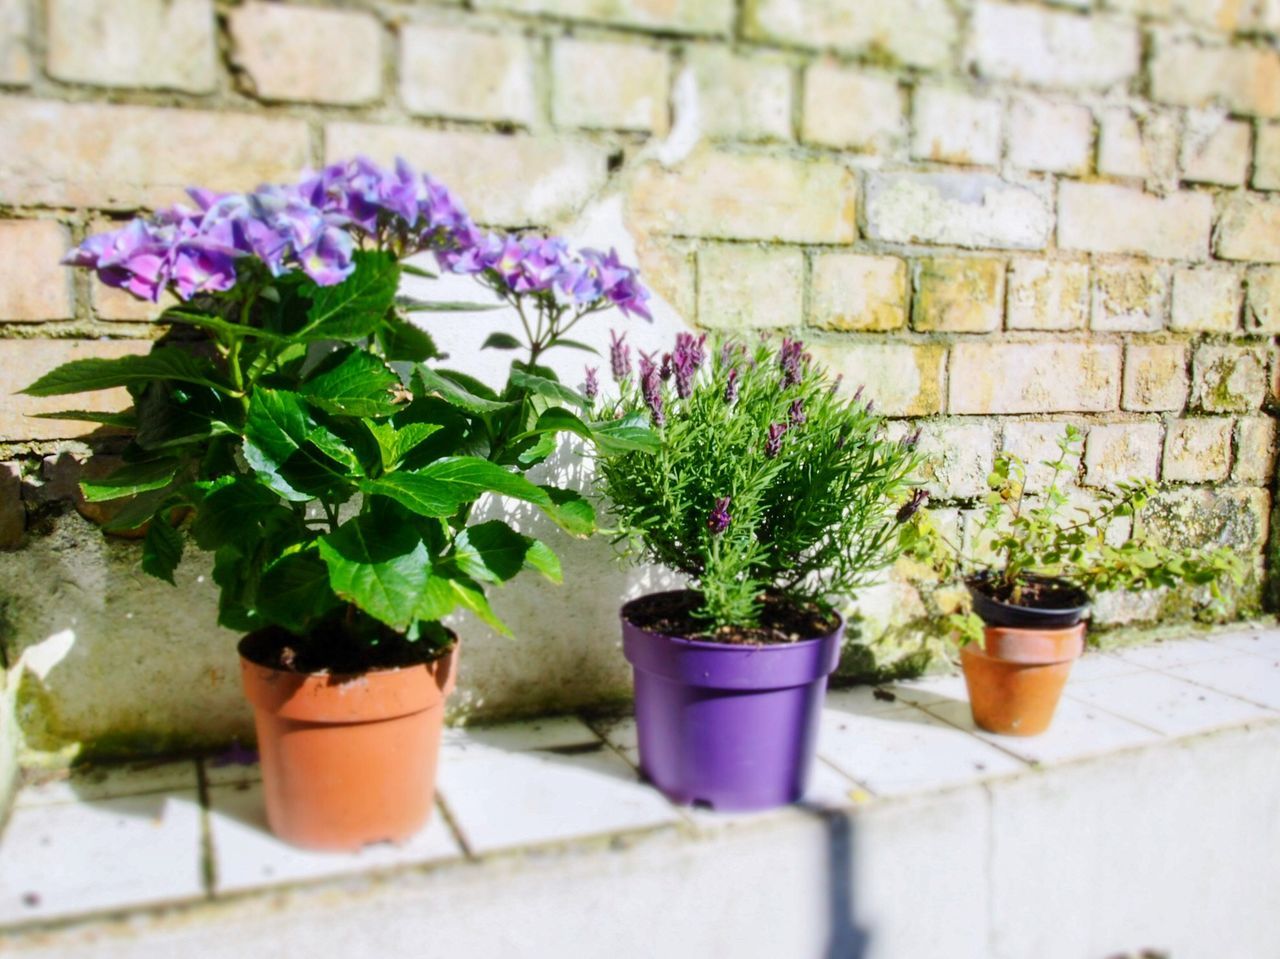 POTTED PLANTS ON WALL